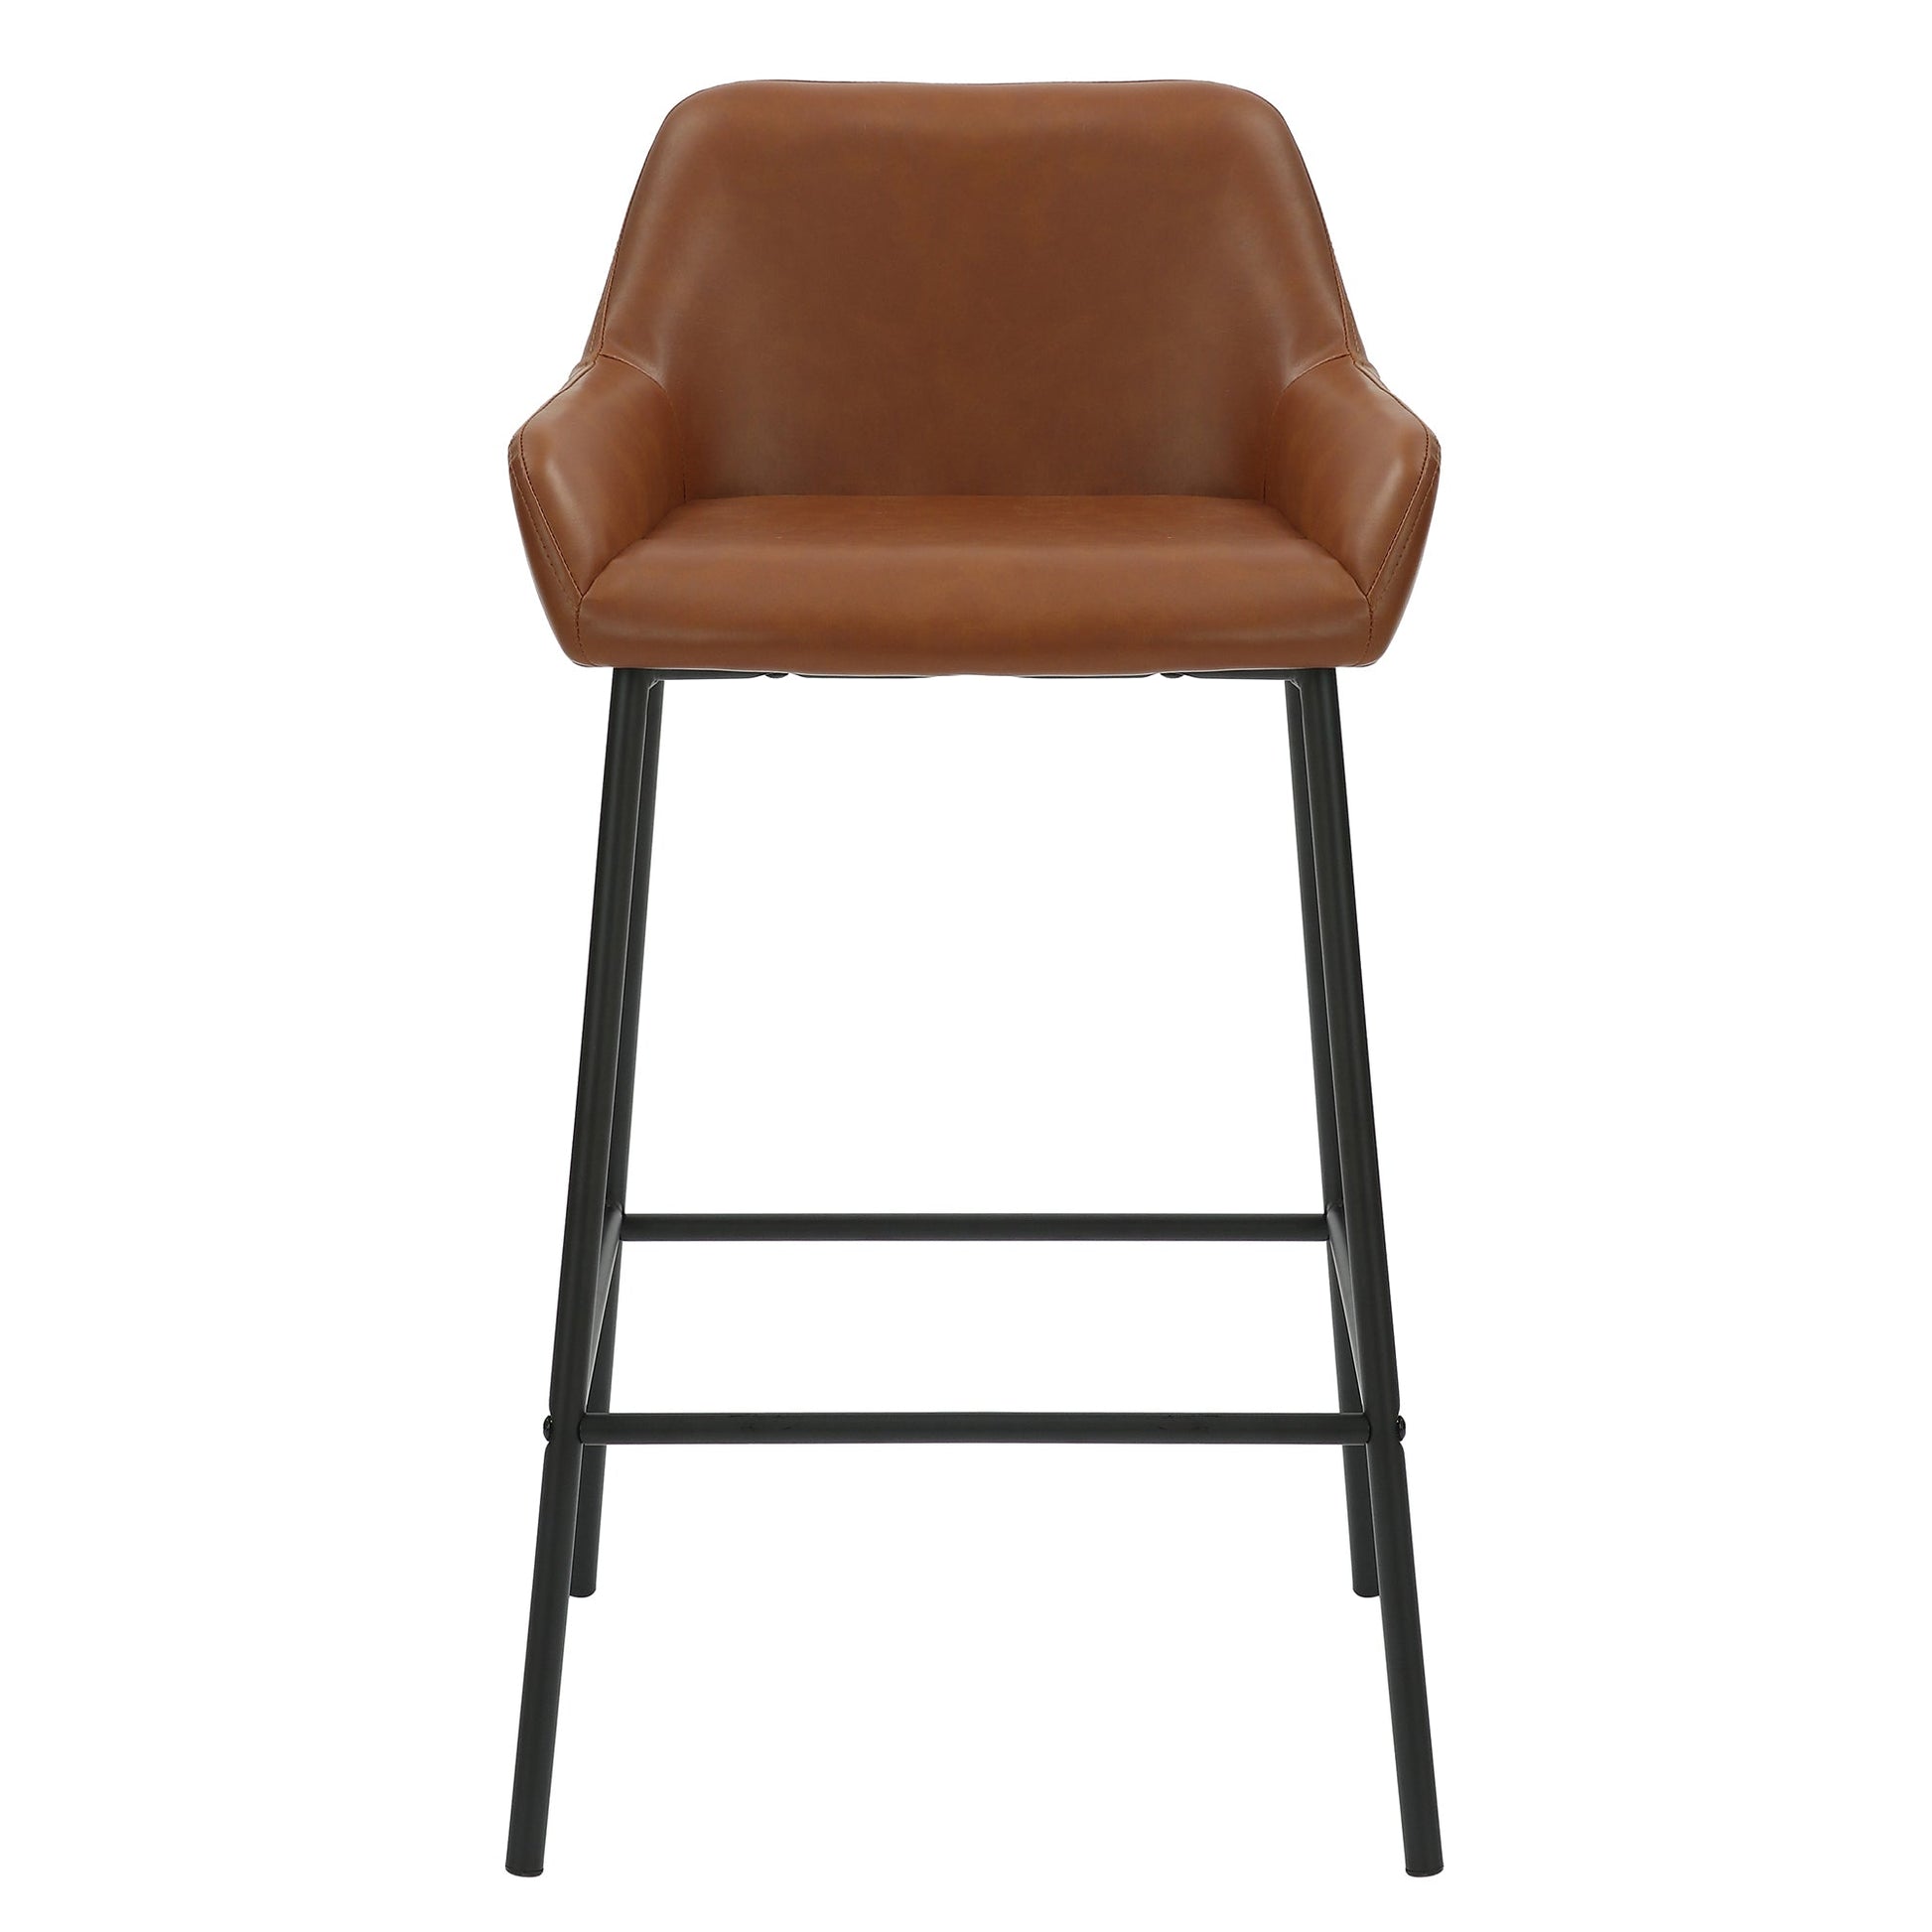 26 inch Bar Stools | Sets of 2 | Baily Caramel and Black - Your Bar Stools Canada